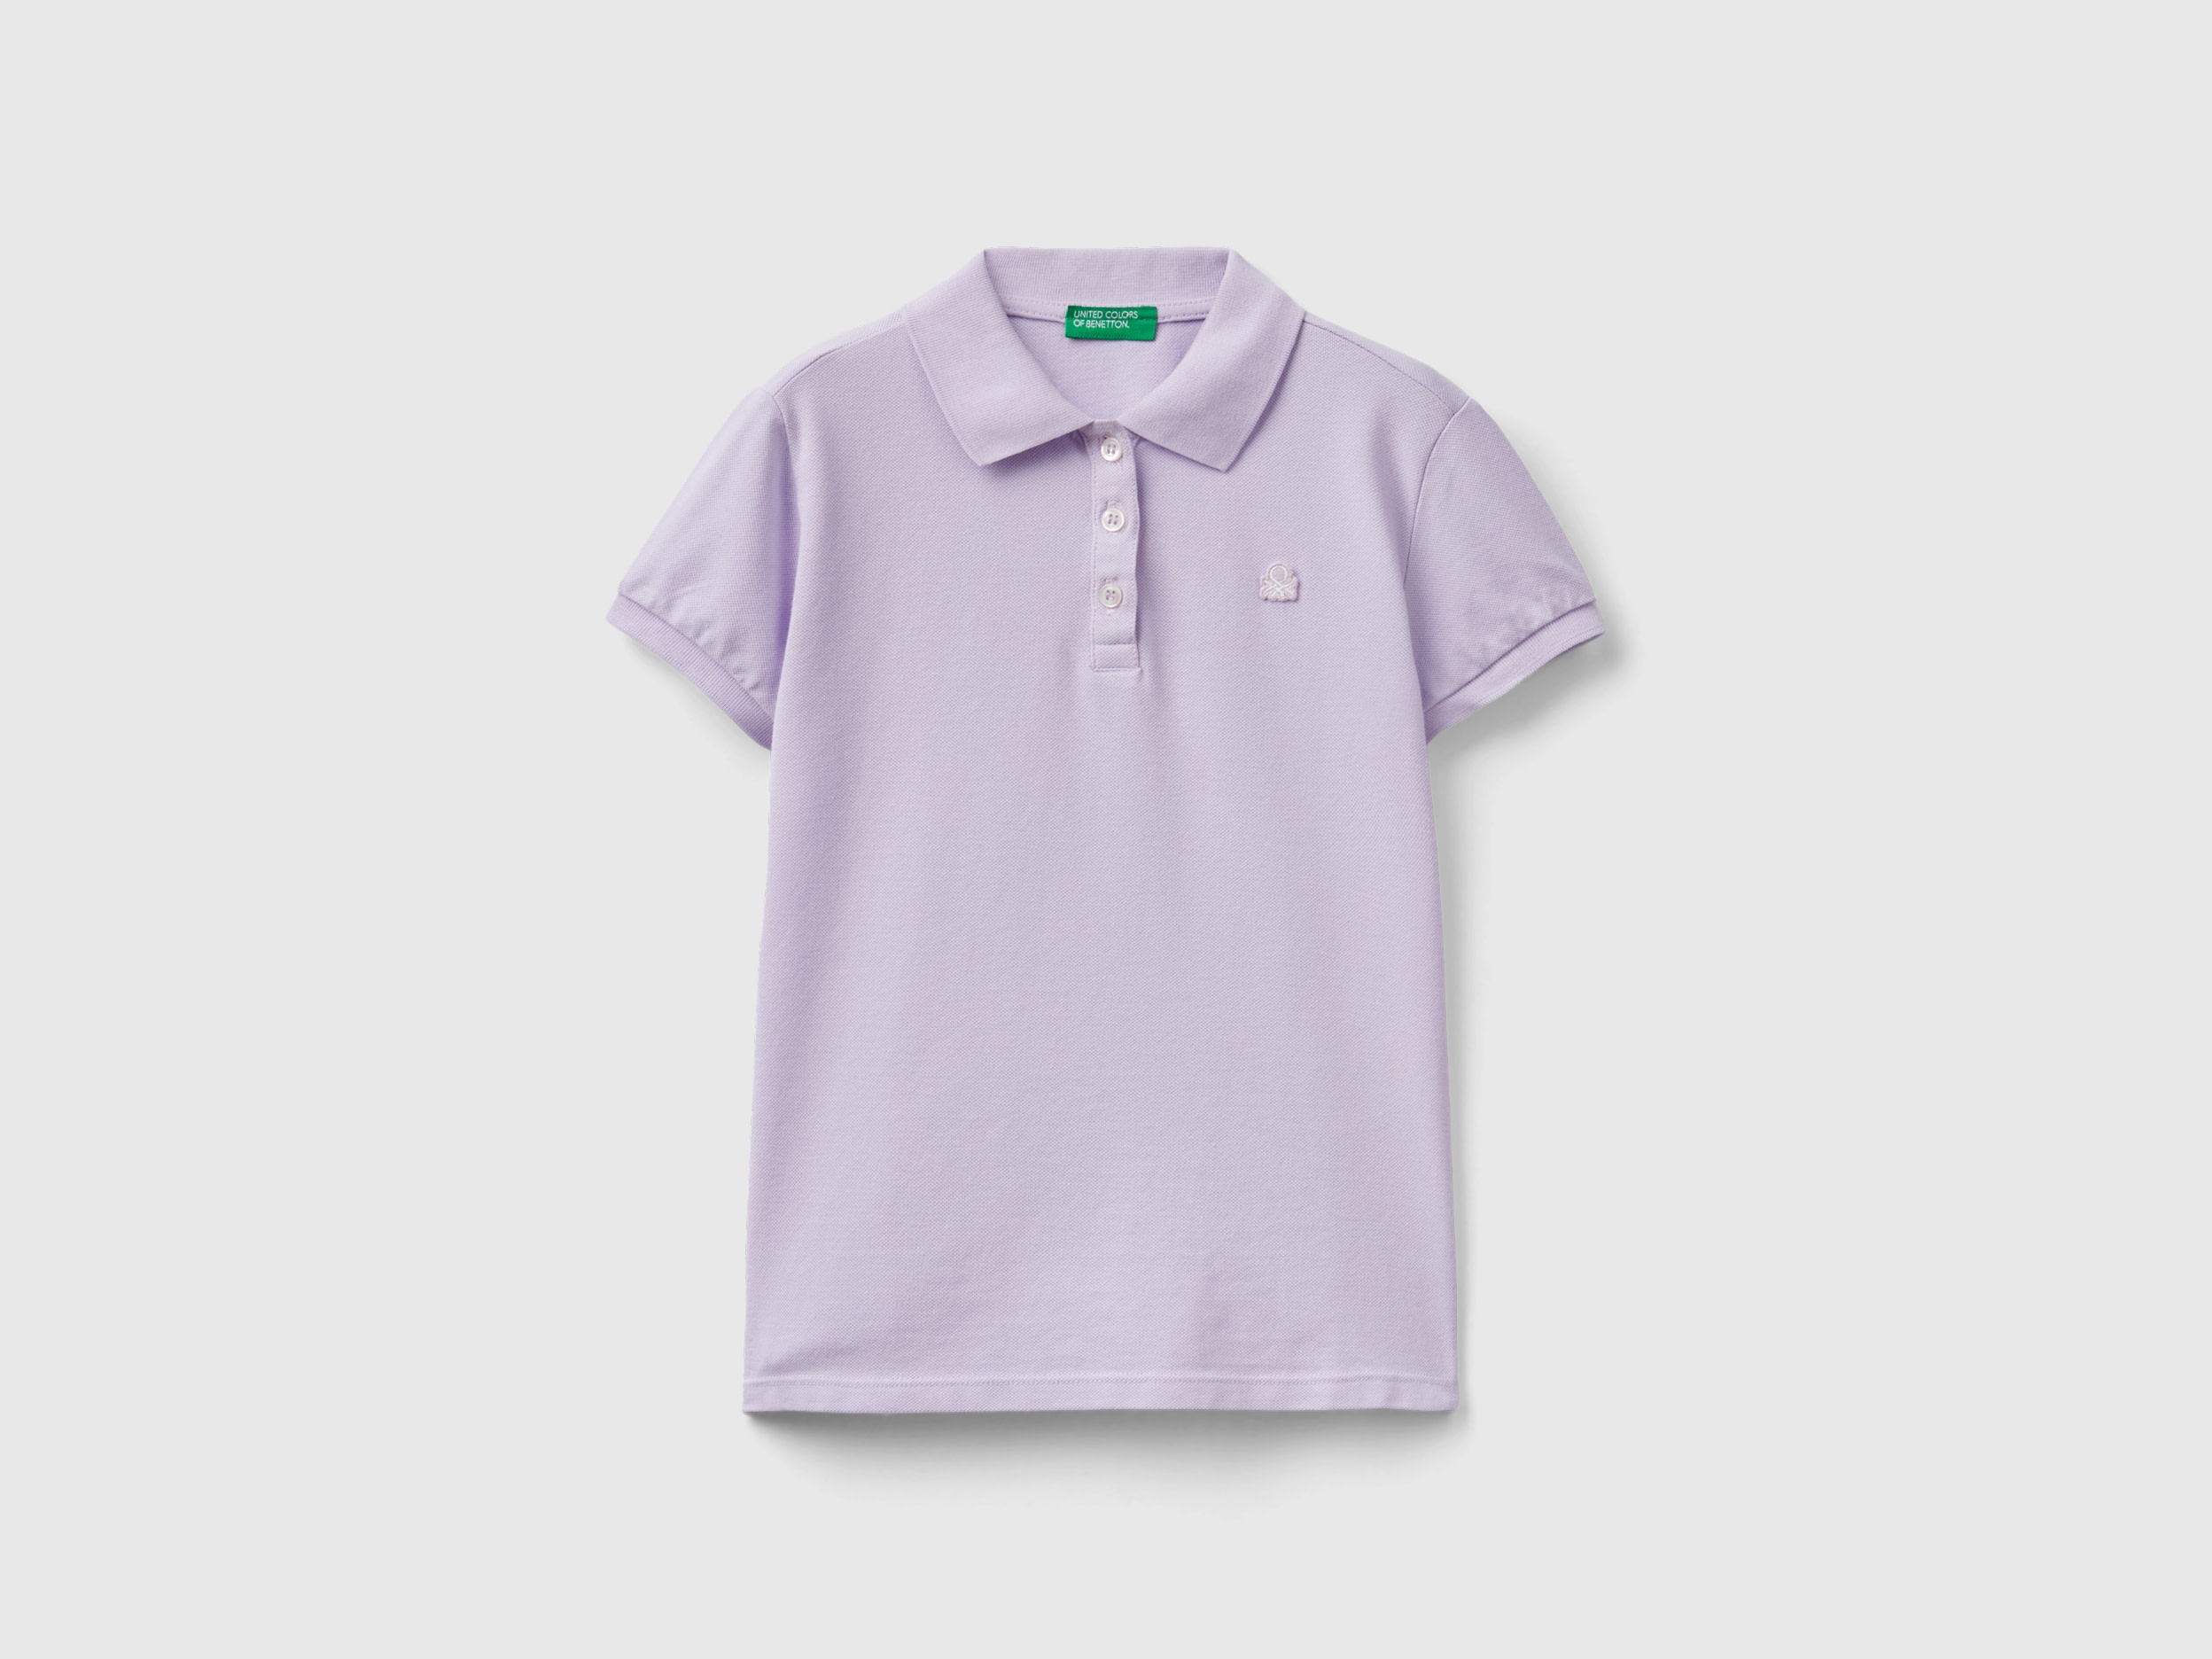 Image of Benetton, Short Sleeve Polo In Organic Cotton, size L, Lilac, Kids